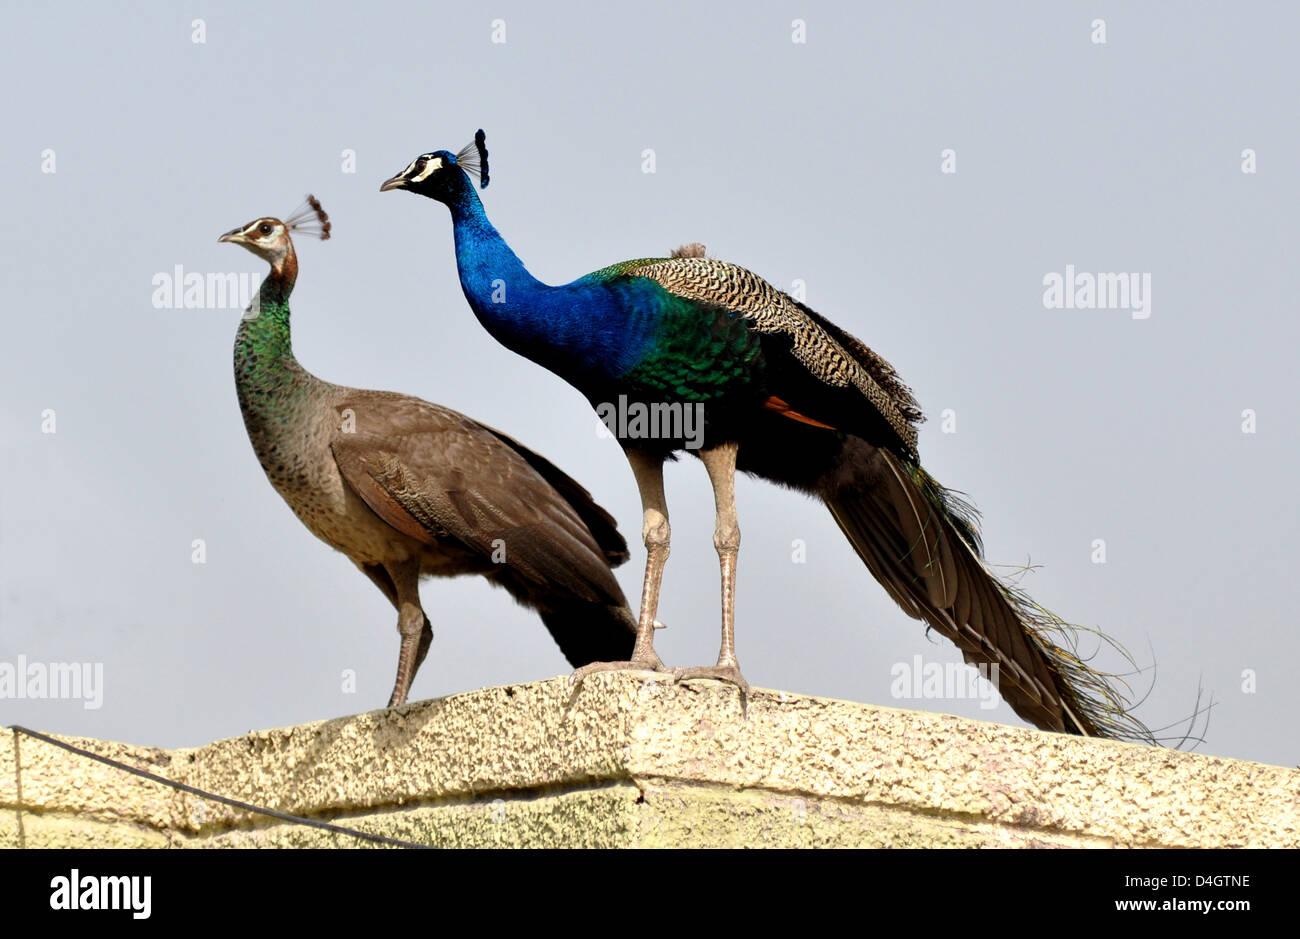 A peacock with peahen (female) or Indian peafowl (Pavo cristatus) at terrace in Mathura, India. Stock Photo